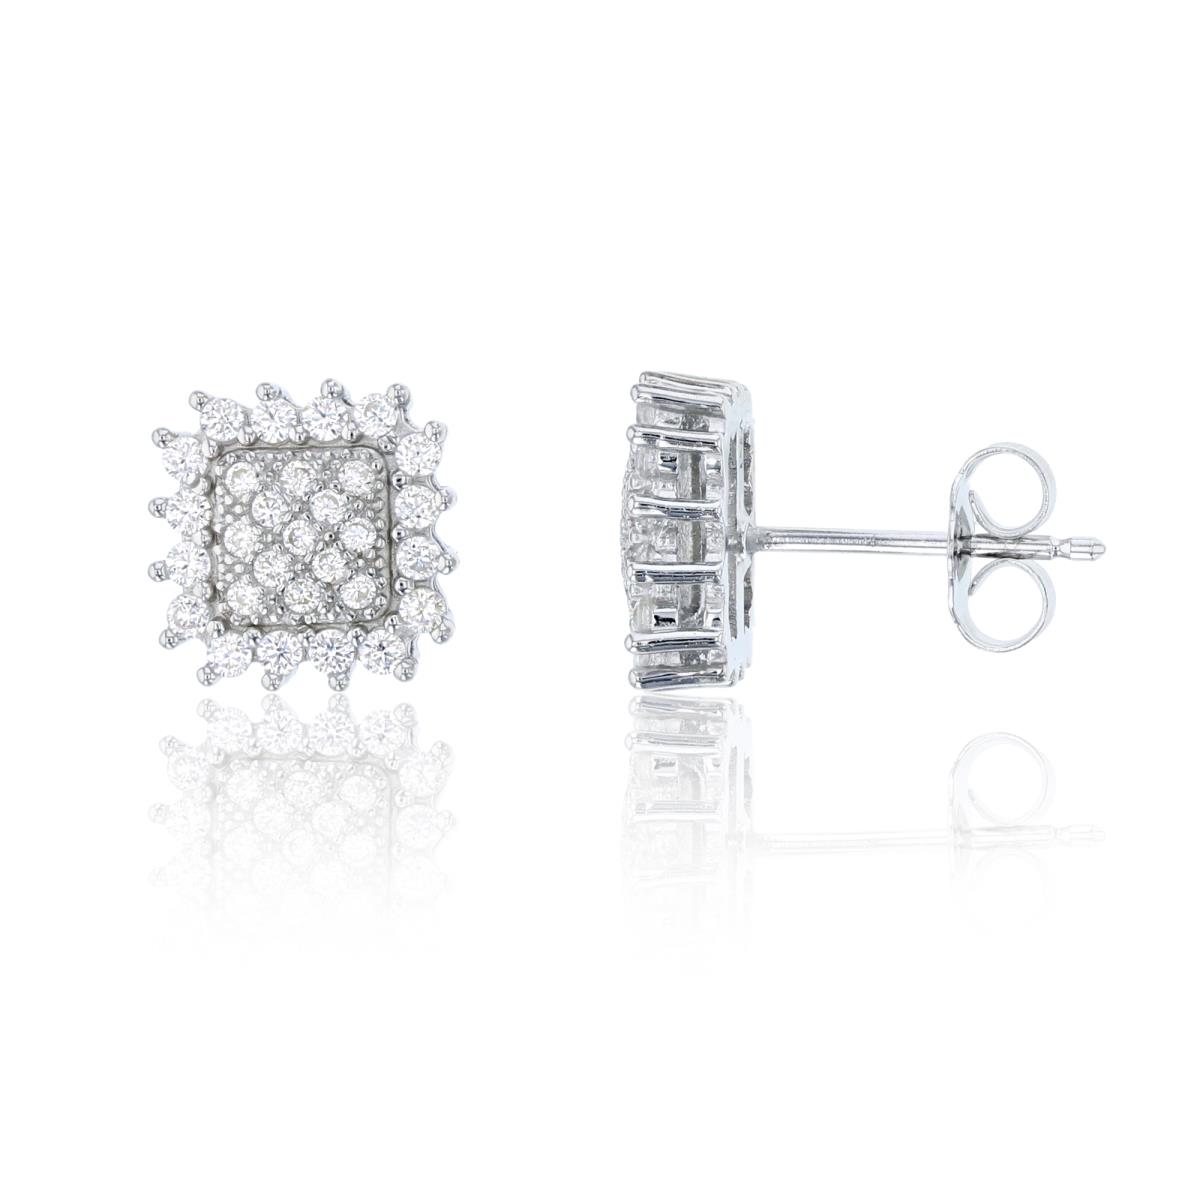 Sterling Silver 10x10mm Crinckled Square Pave Stud Earring